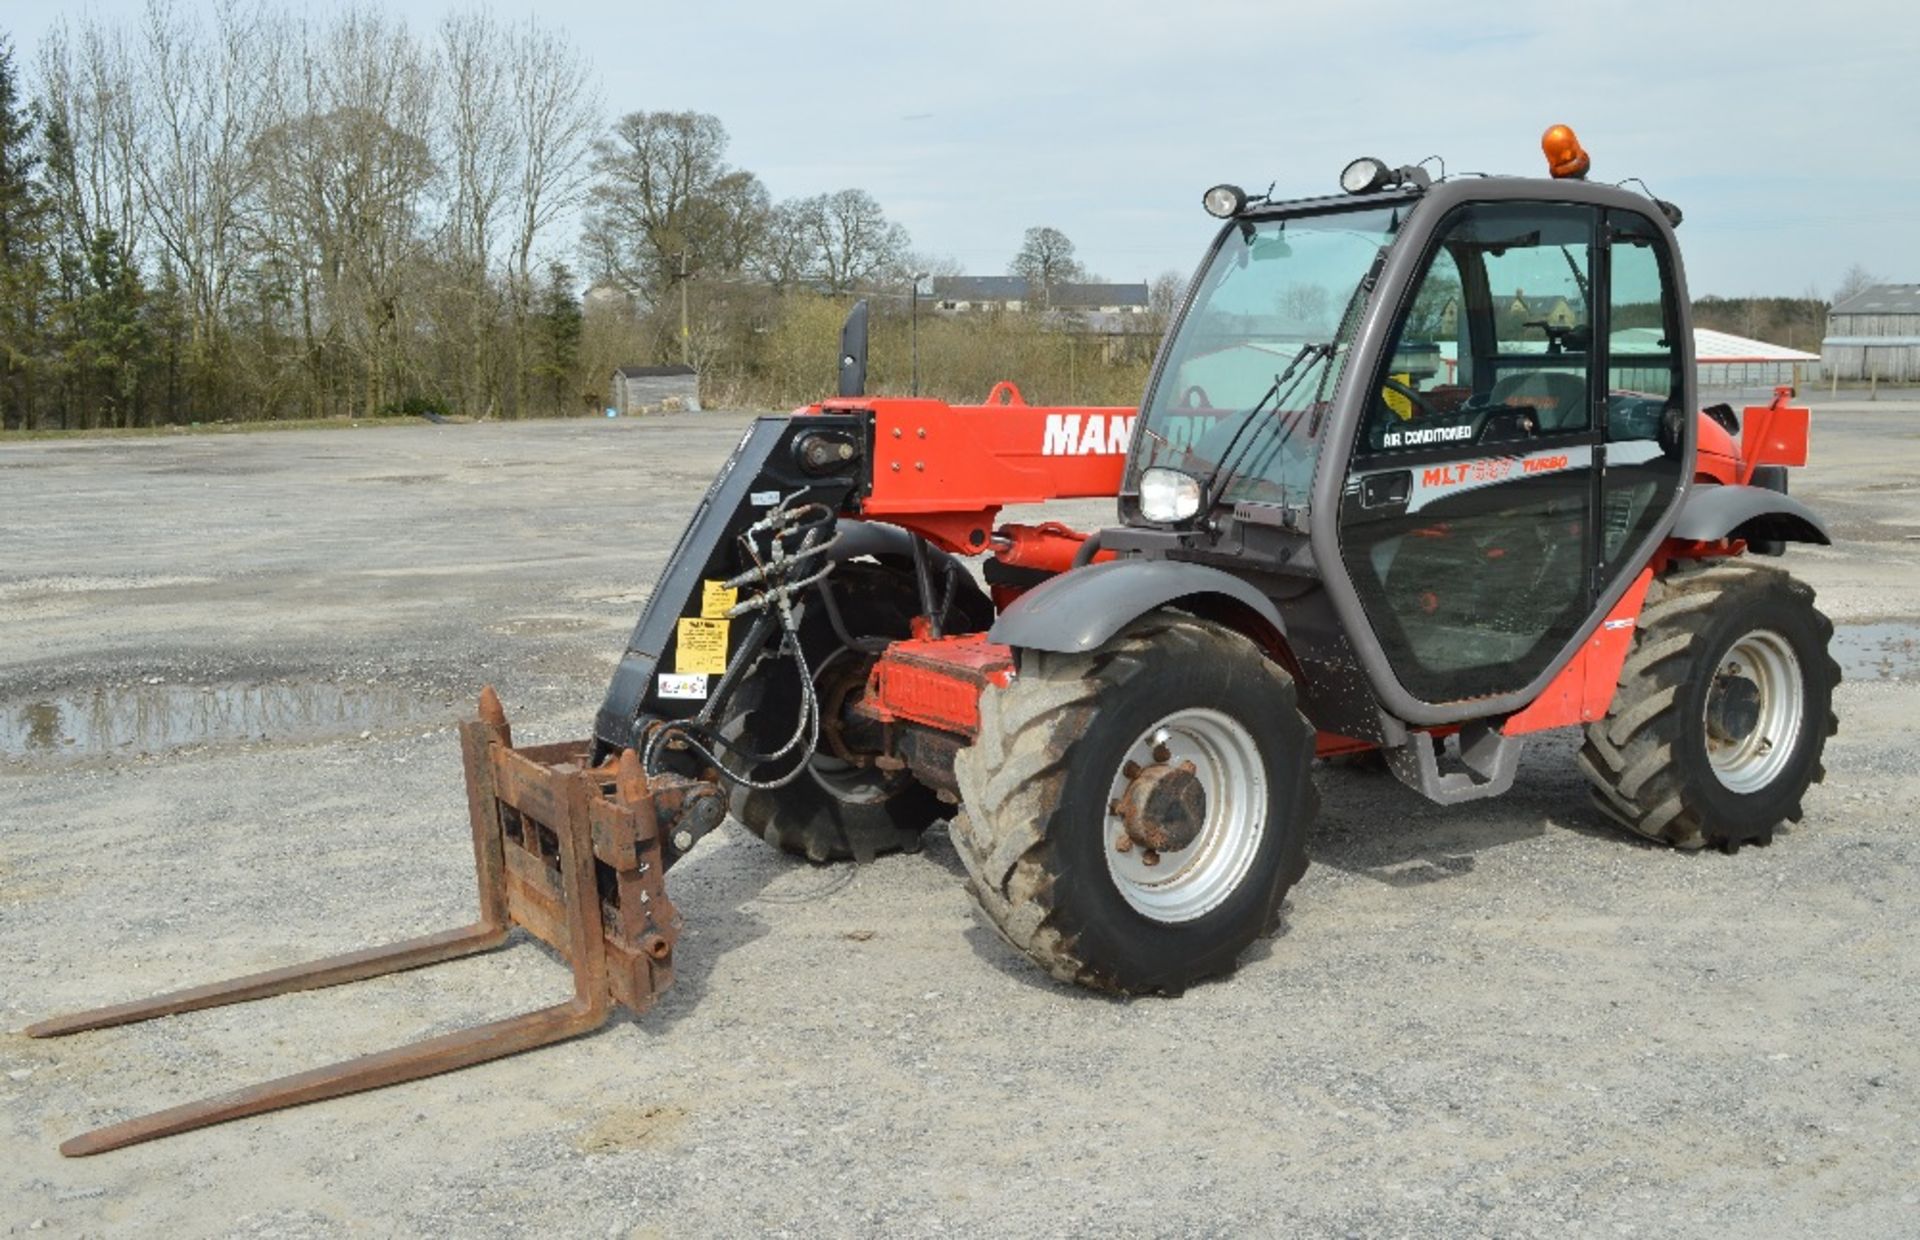 Manitou MLT 627 Turbo 6 metre telescopic handler
Year: 2011
S/N: 904615
Recorded hours: 3600